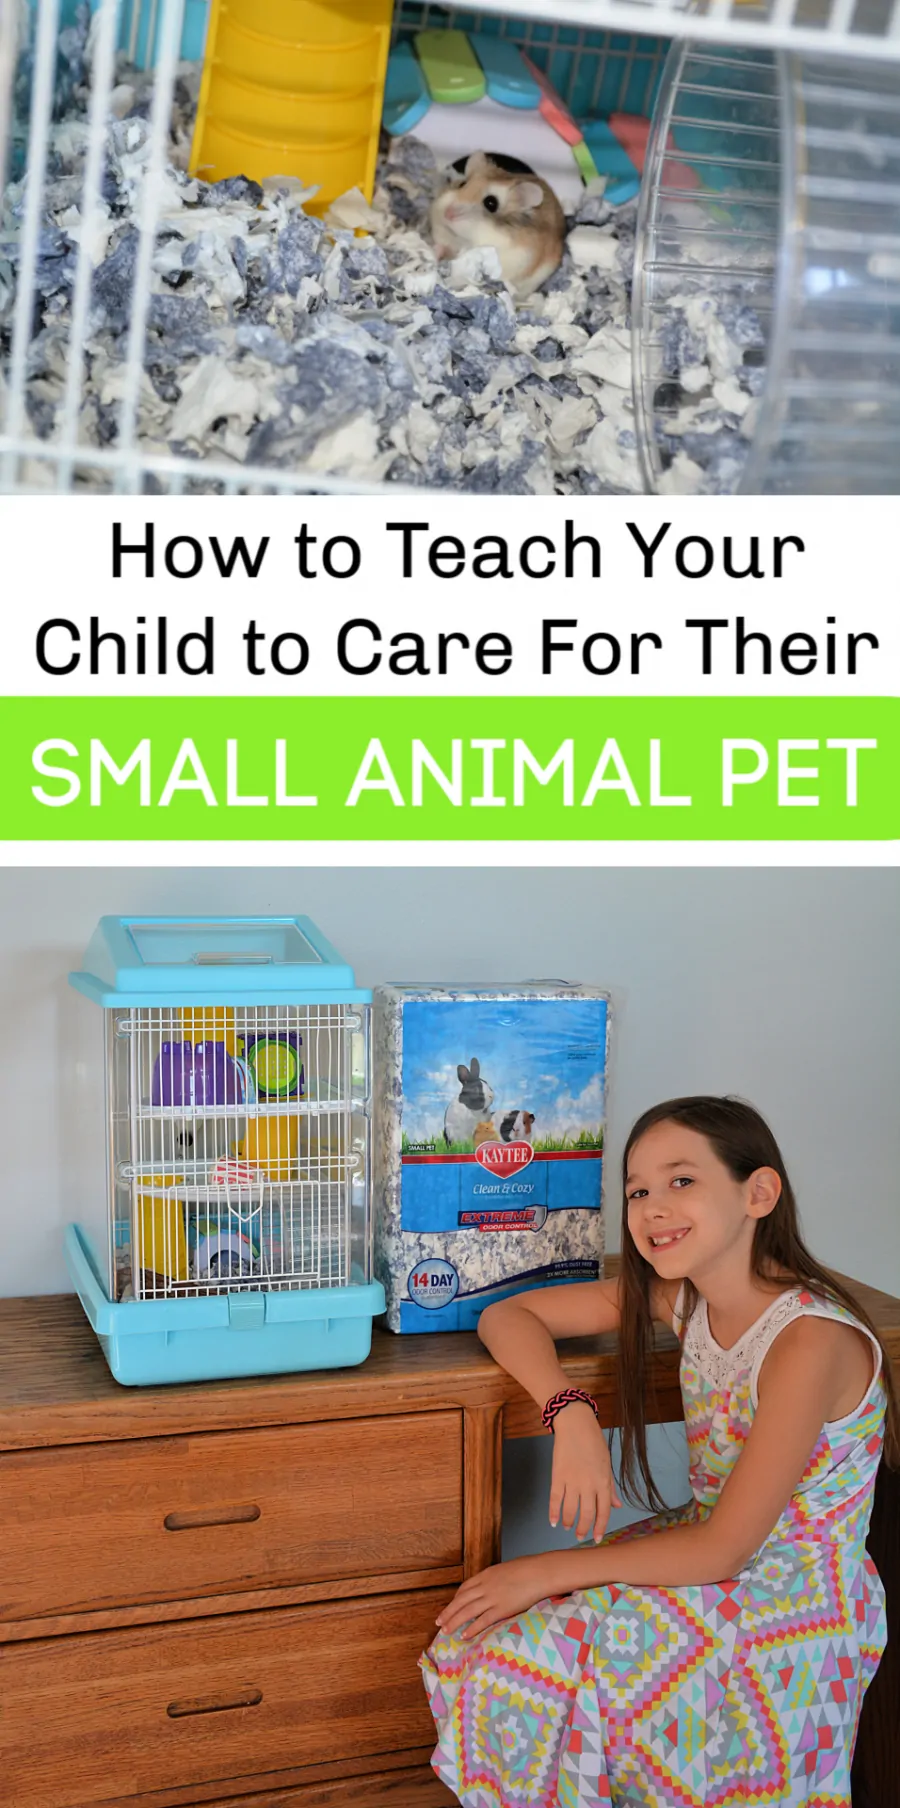 How to Teach Children to Care for Small Animals